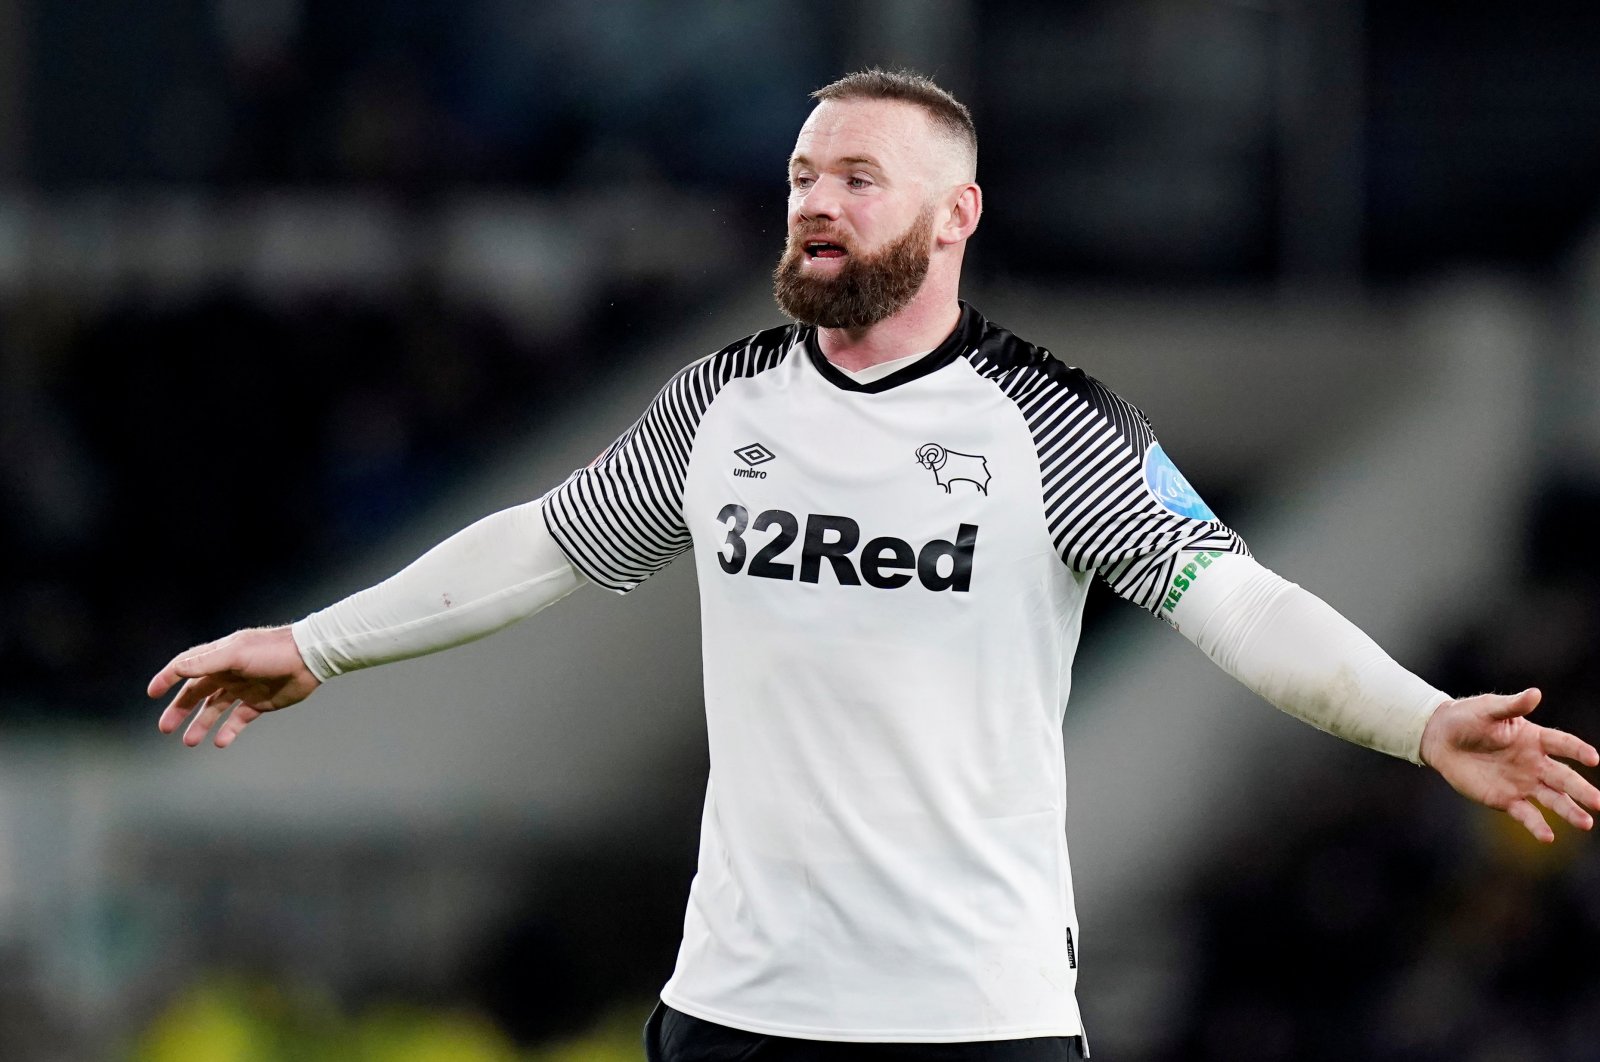 Wayne Rooney reacts during a match against Manchester United, in Derby, Britain, Thursday, March 5, 2020. (Reuters Photo)